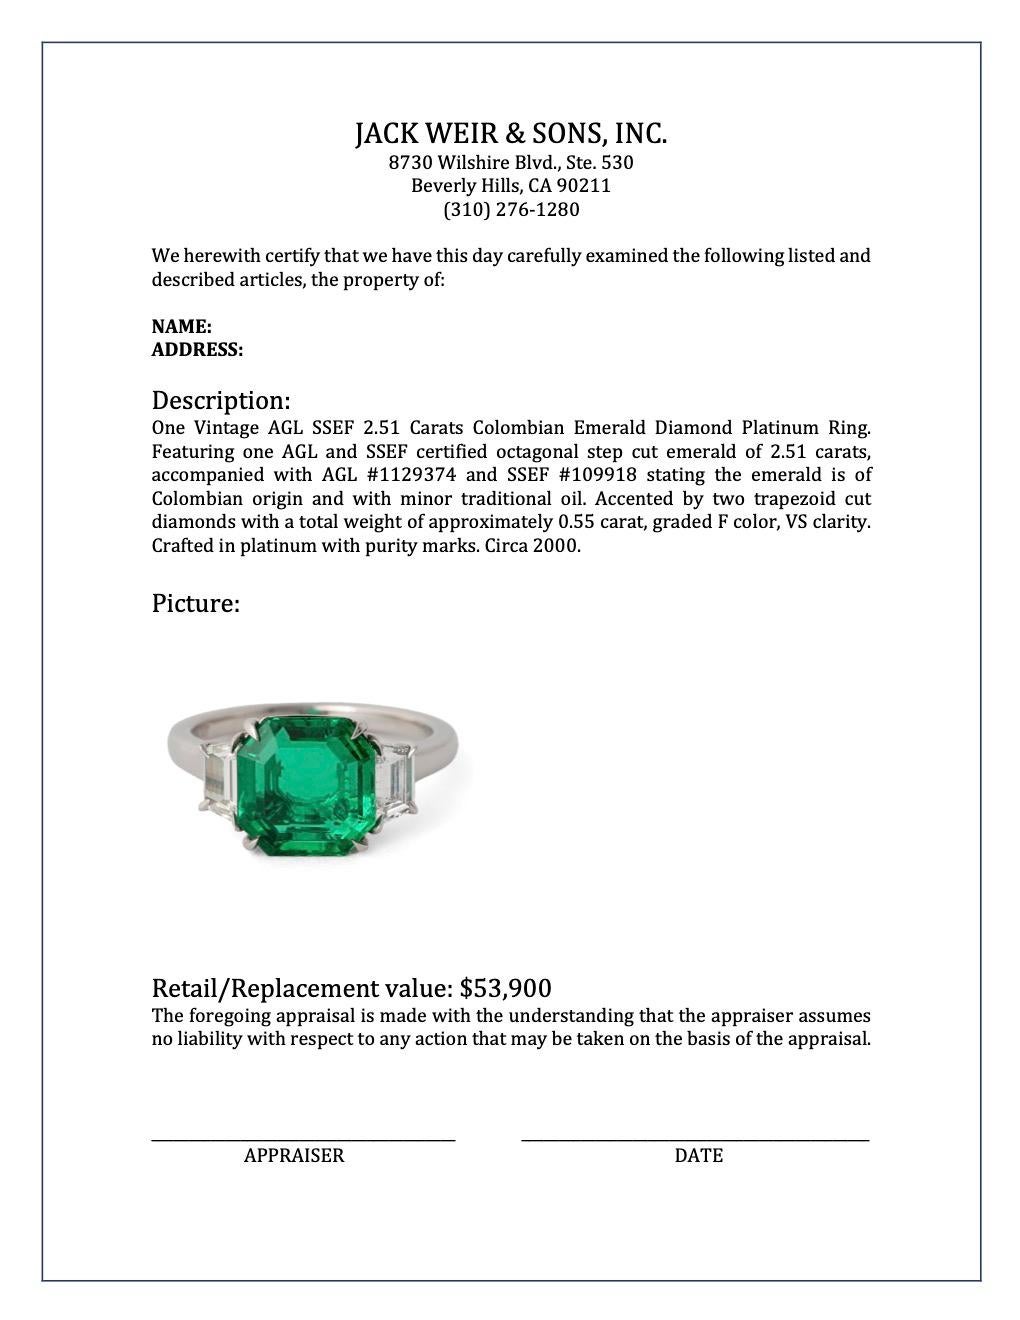 Vintage AGL SSEF 2.51 Carats Colombian Emerald Diamond Platinum Ring For Sale 3